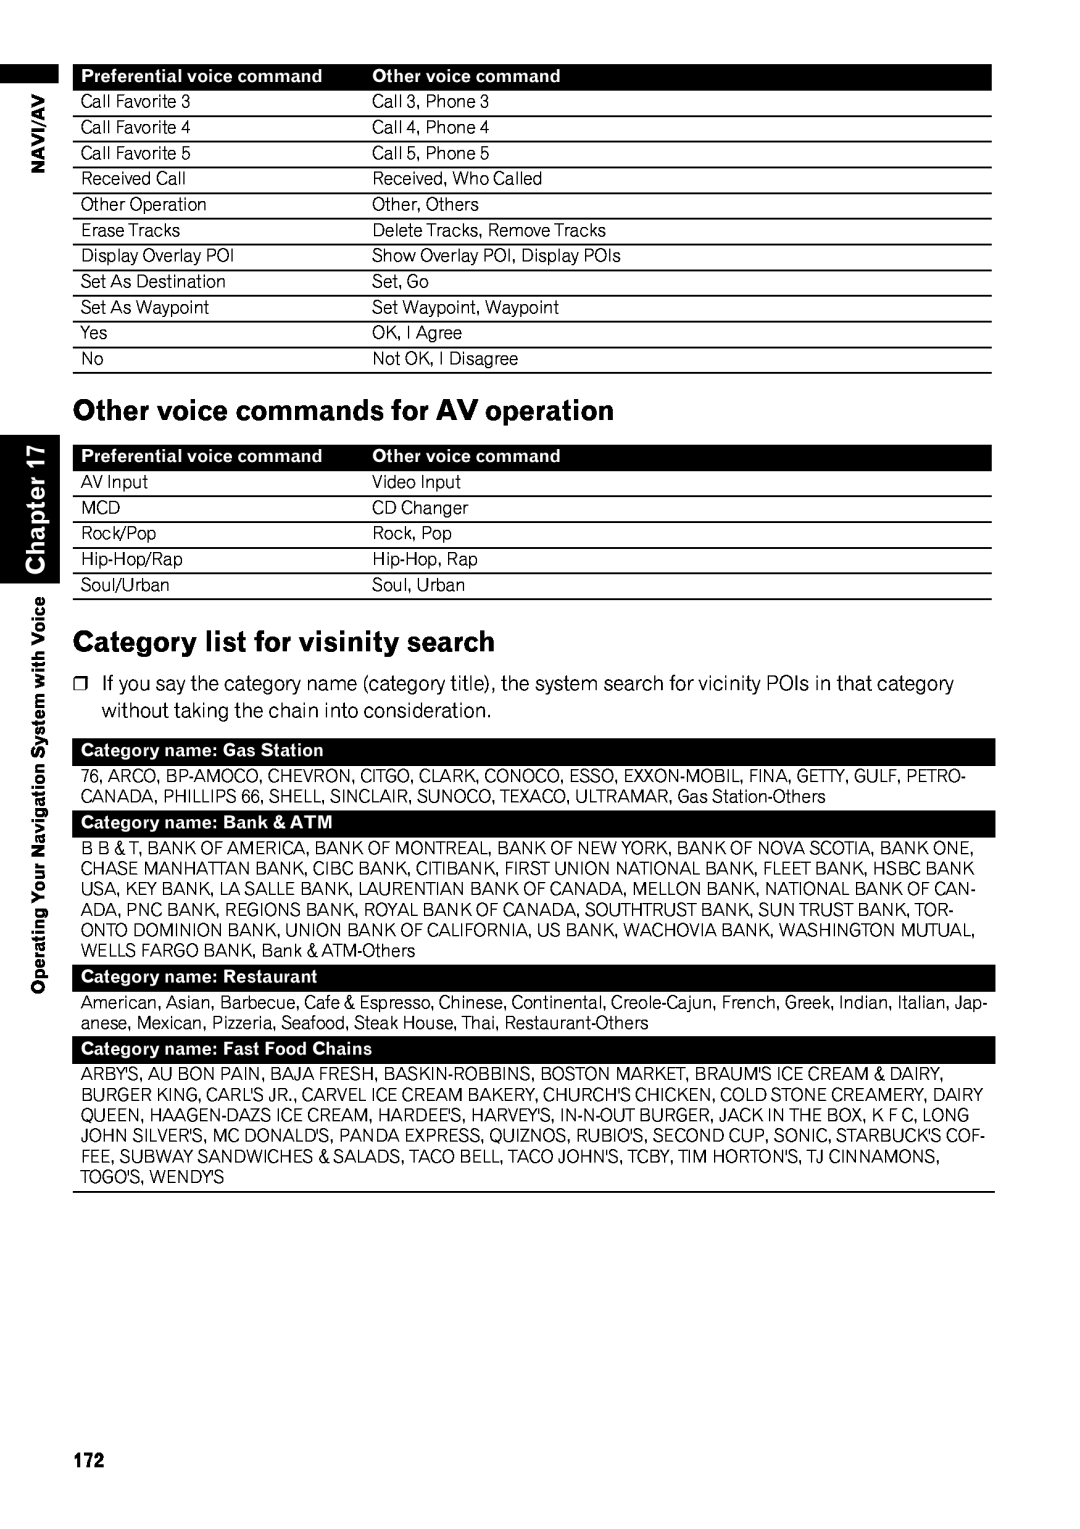 Pioneer AVIC-Z1 operation manual Other voice commands for AV operation, Category list for visinity search, Chapter 